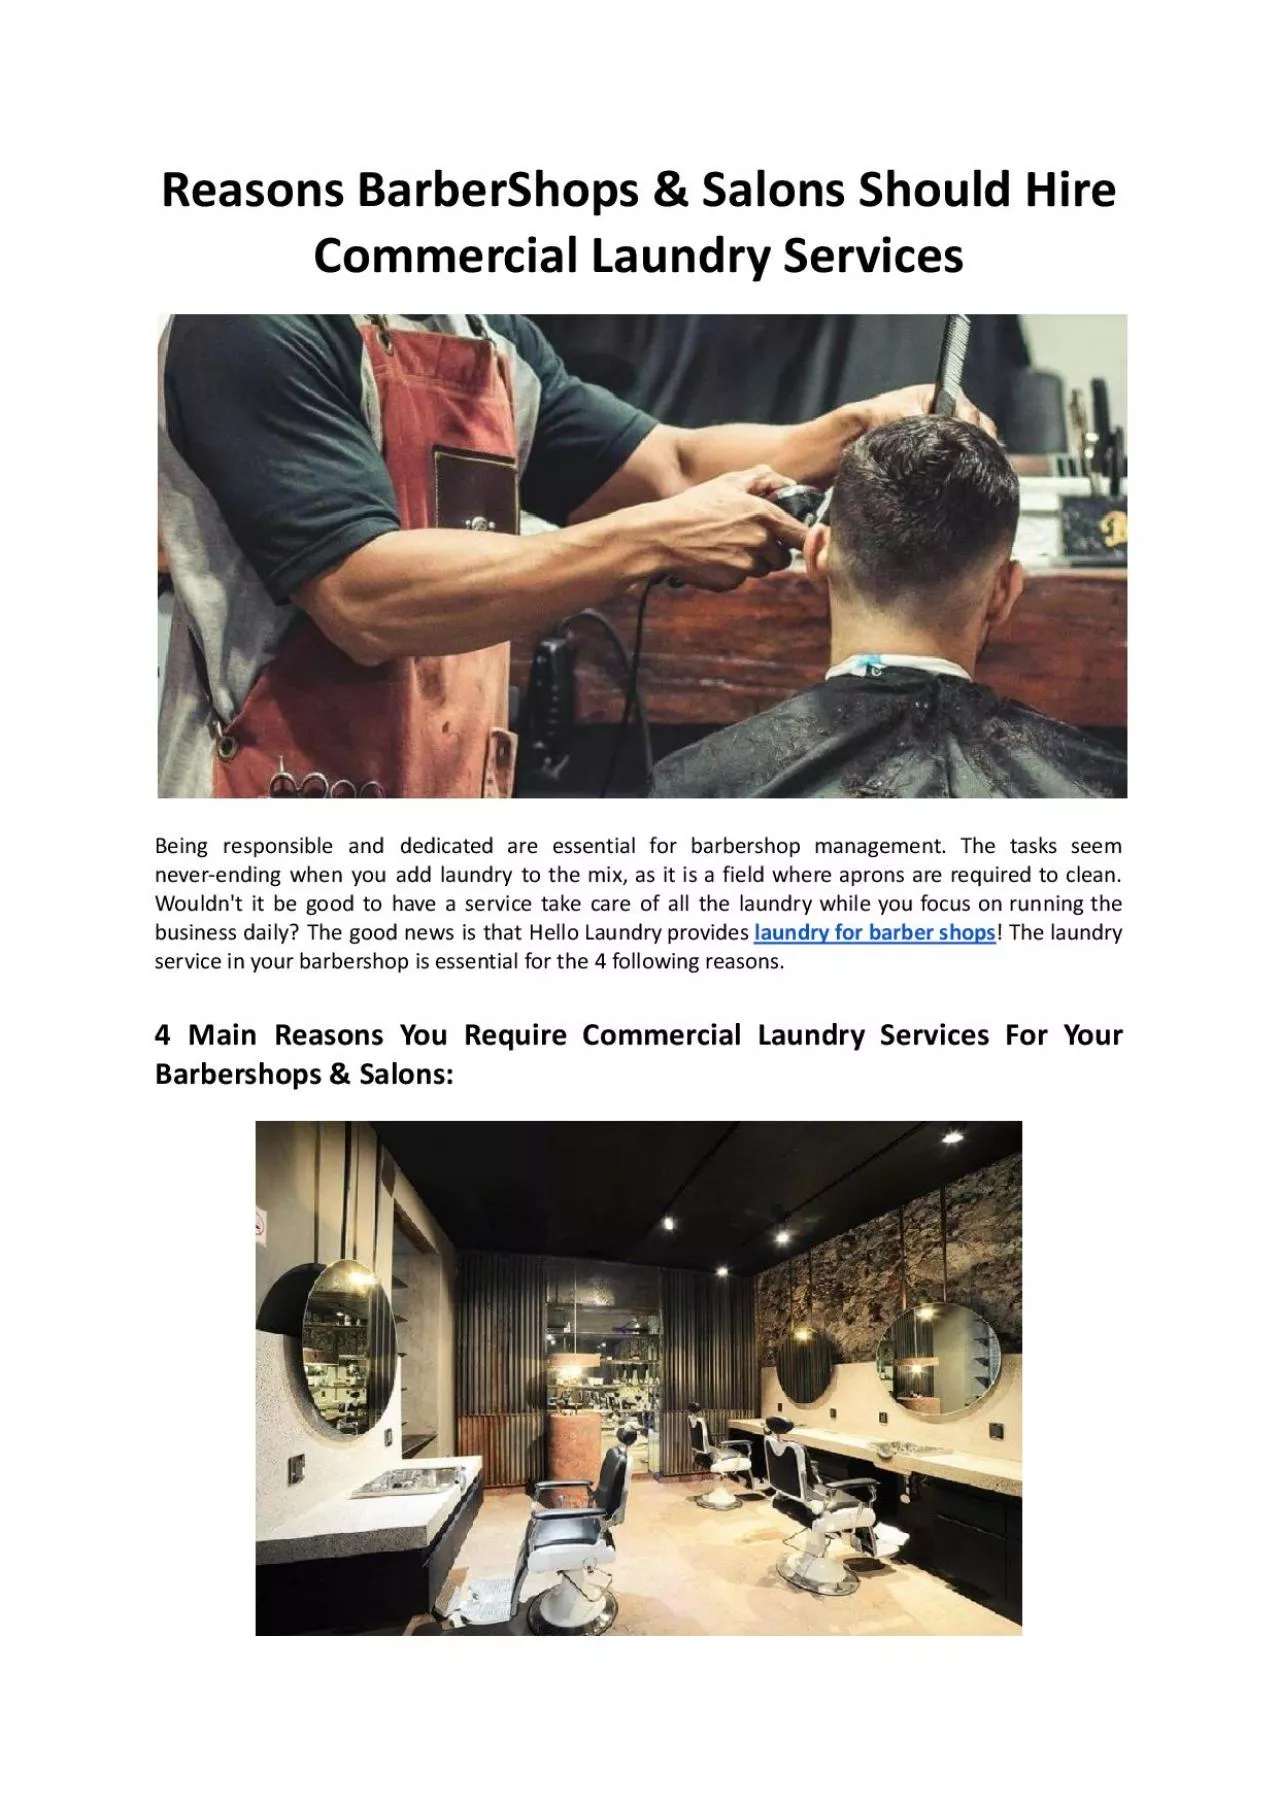 Reasons BarberShops & Salons Should Hire Commercial Laundry Services - Hello Laundry